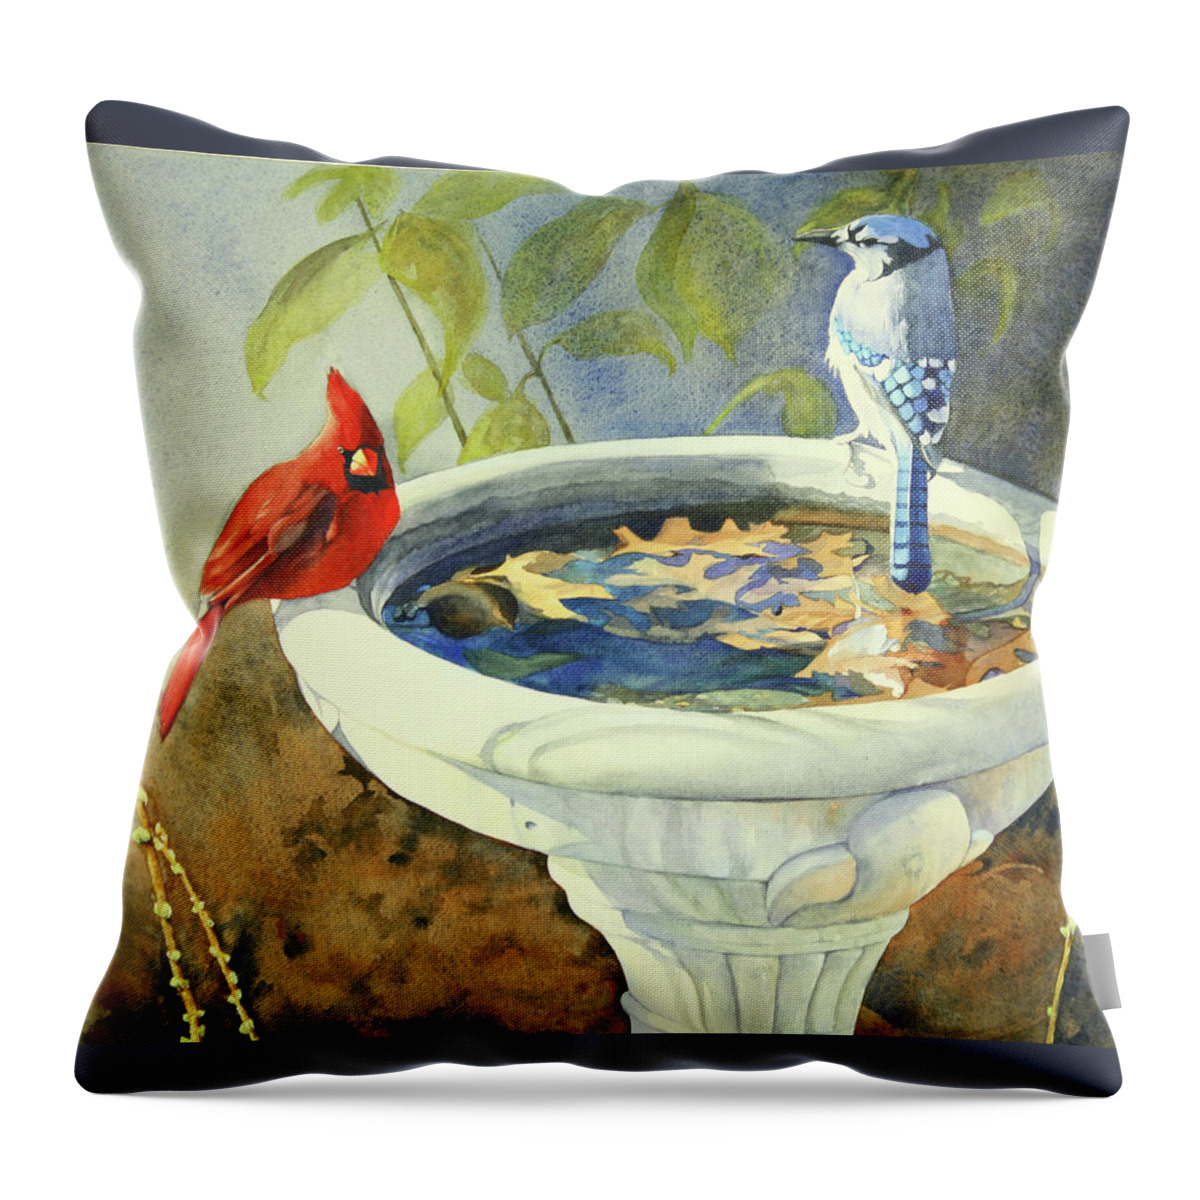 Birds Throw Pillow featuring the painting Winter's Harbingers by Brenda Beck Fisher